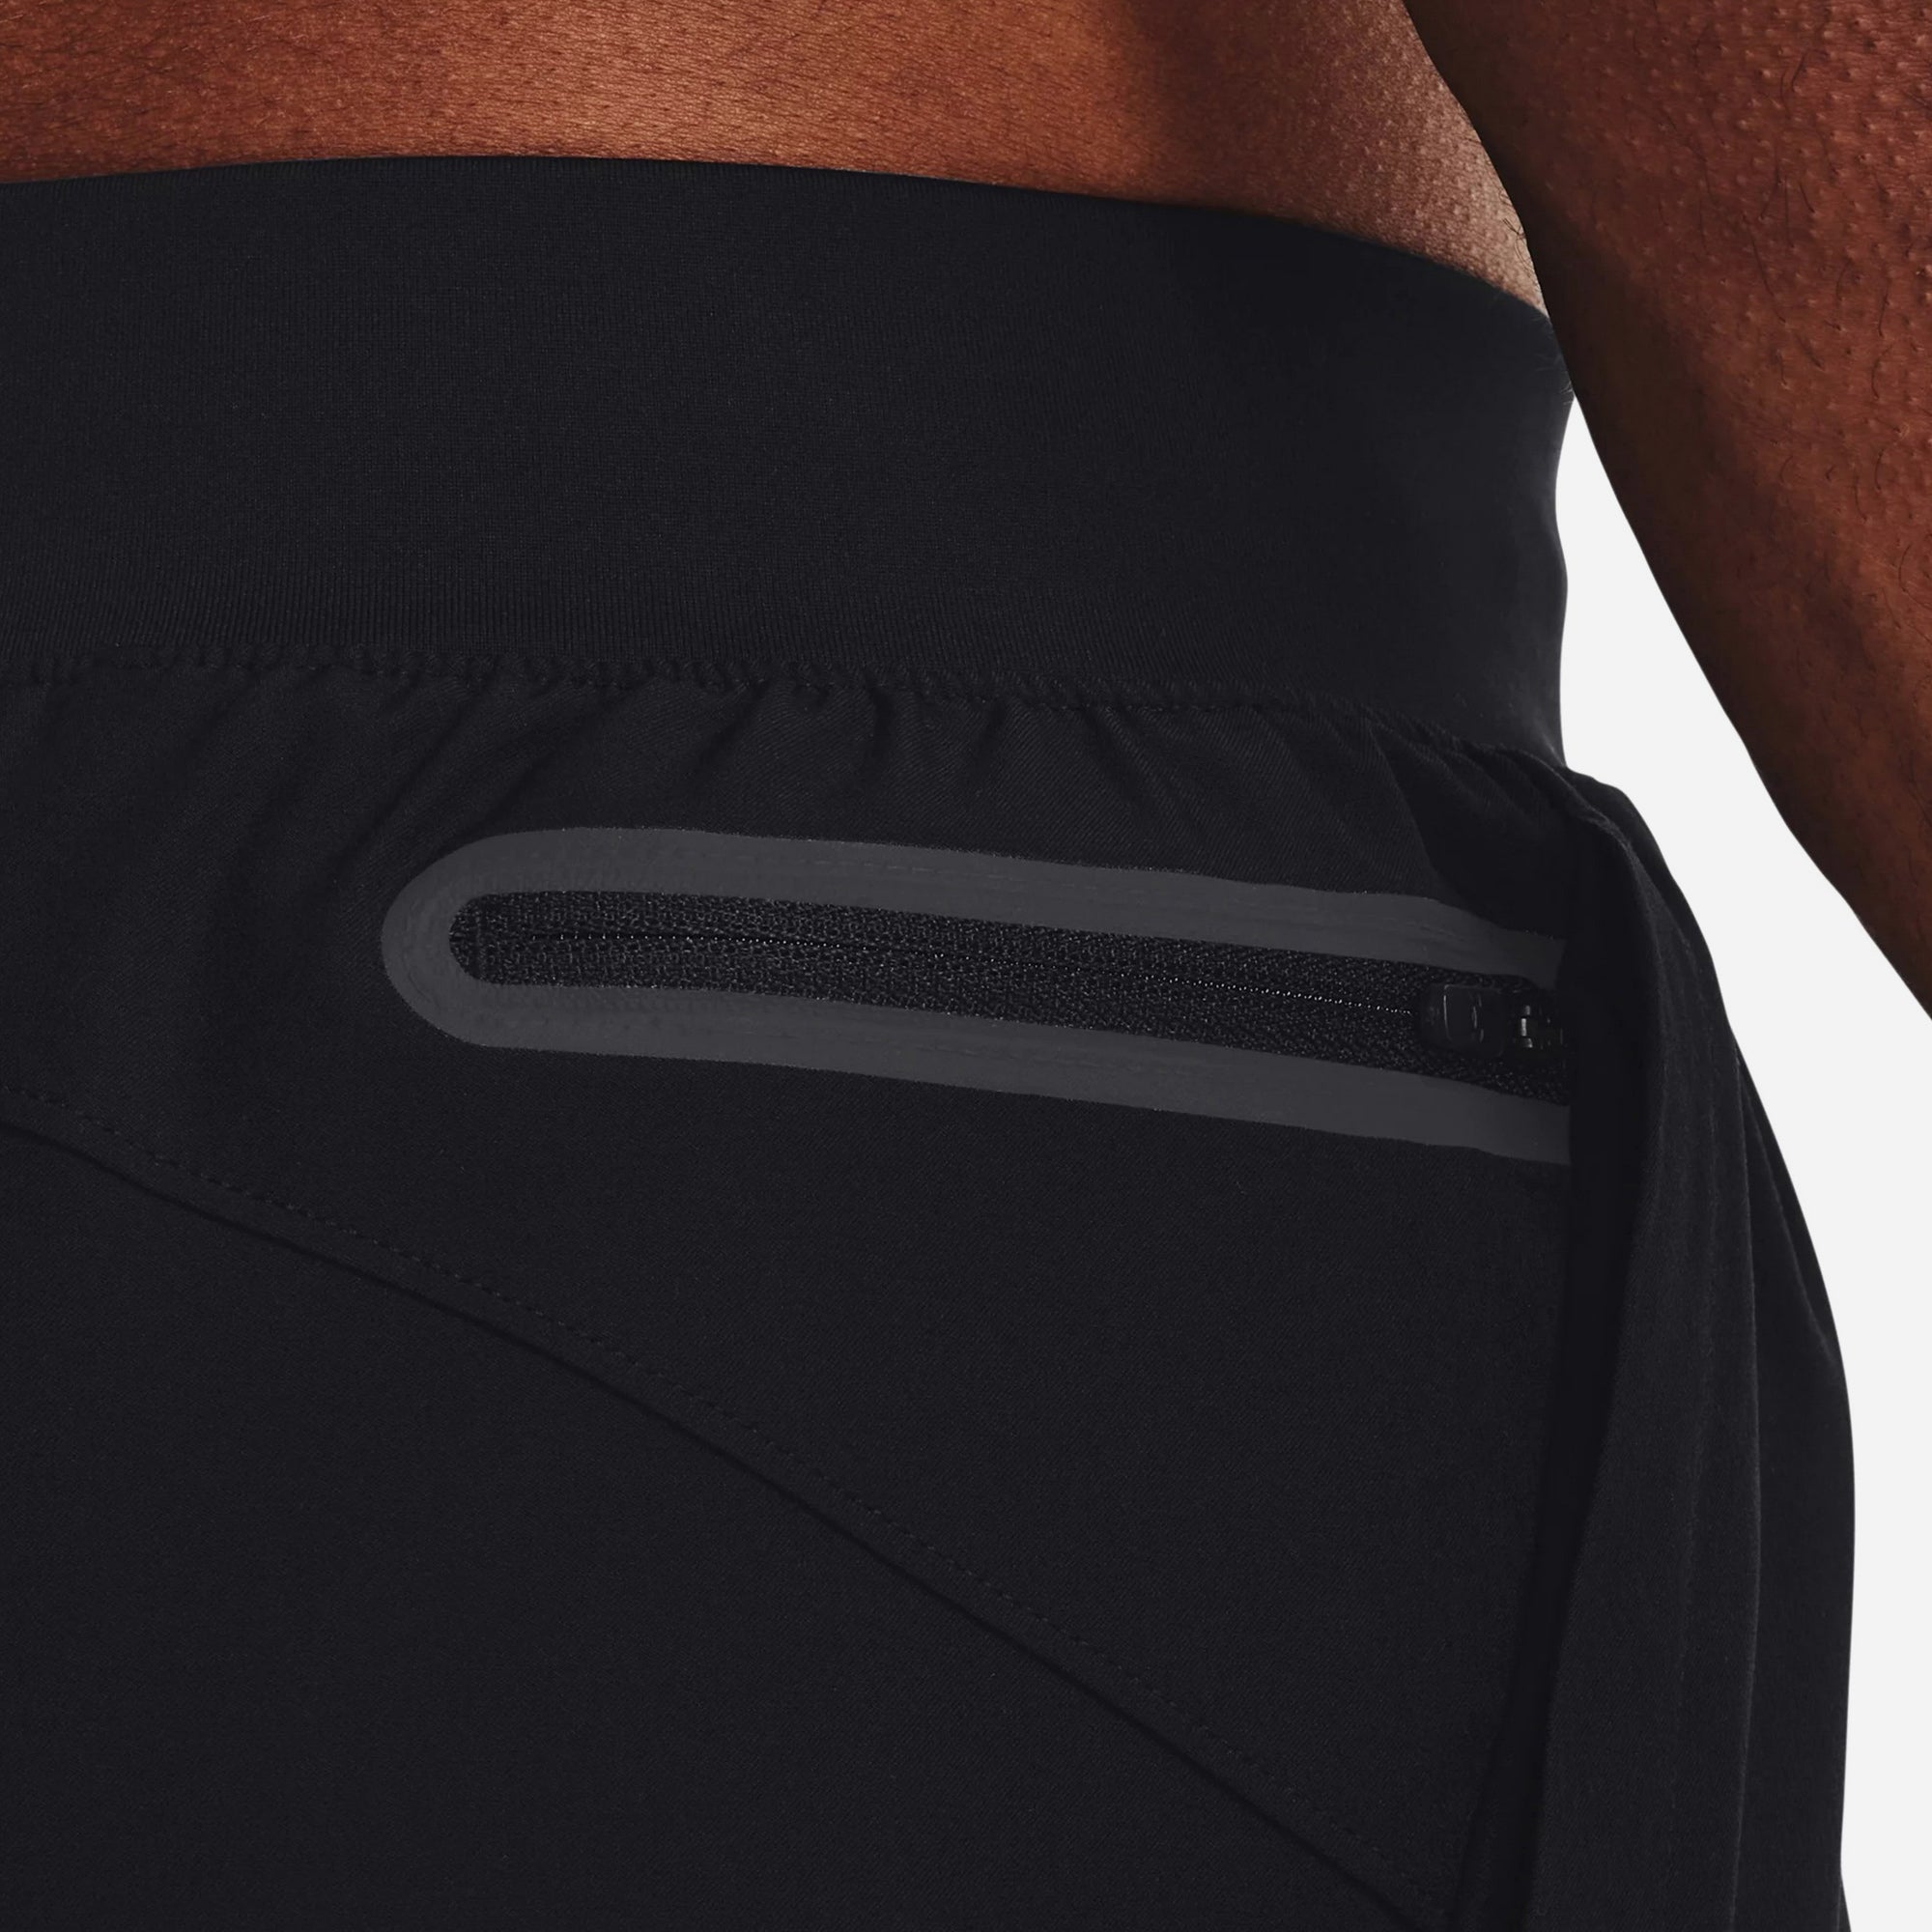 Quần Ngắn Nam Under Armour Unstoppable Shorts - Supersports Vietnam